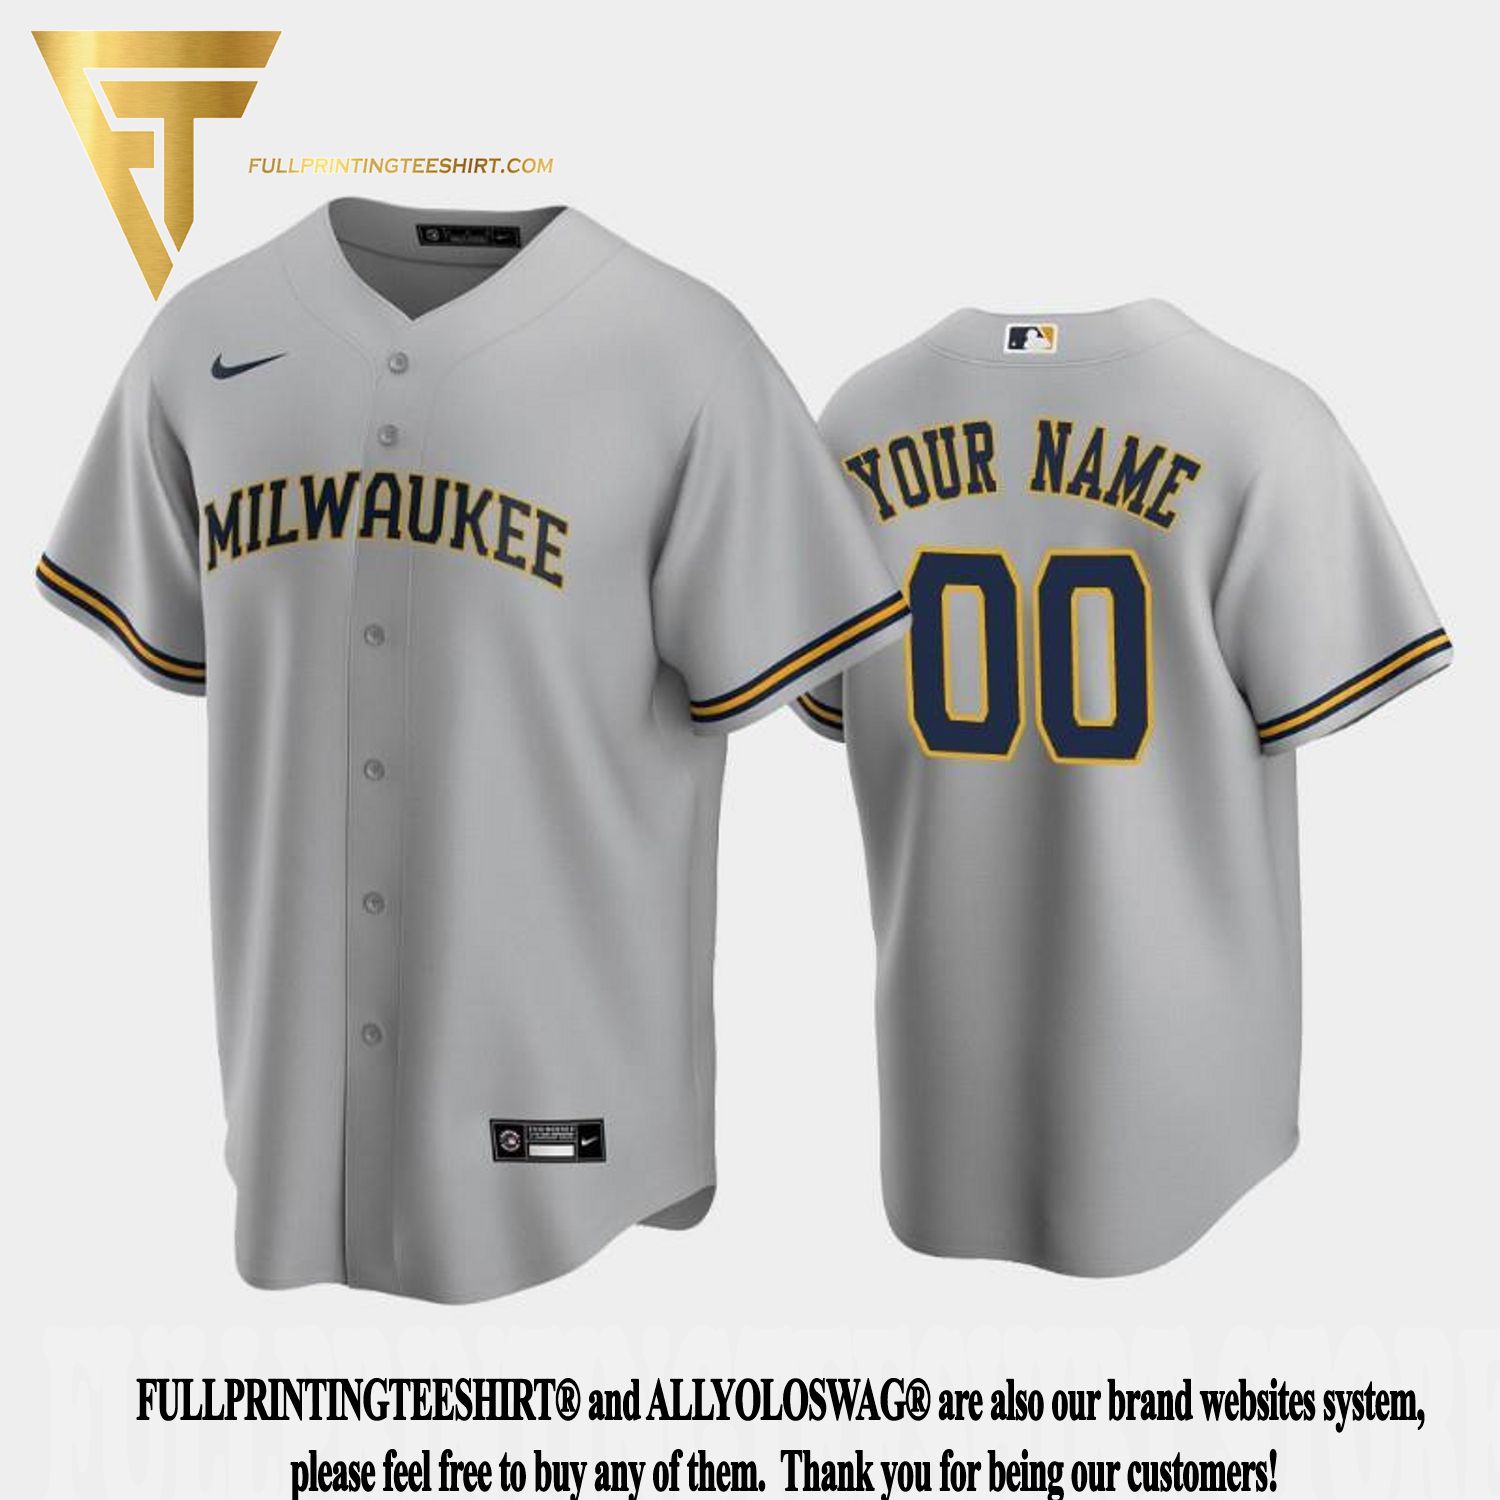 Top-selling Item] Brewers 00 Custom Road Gray 3D Unisex Jersey